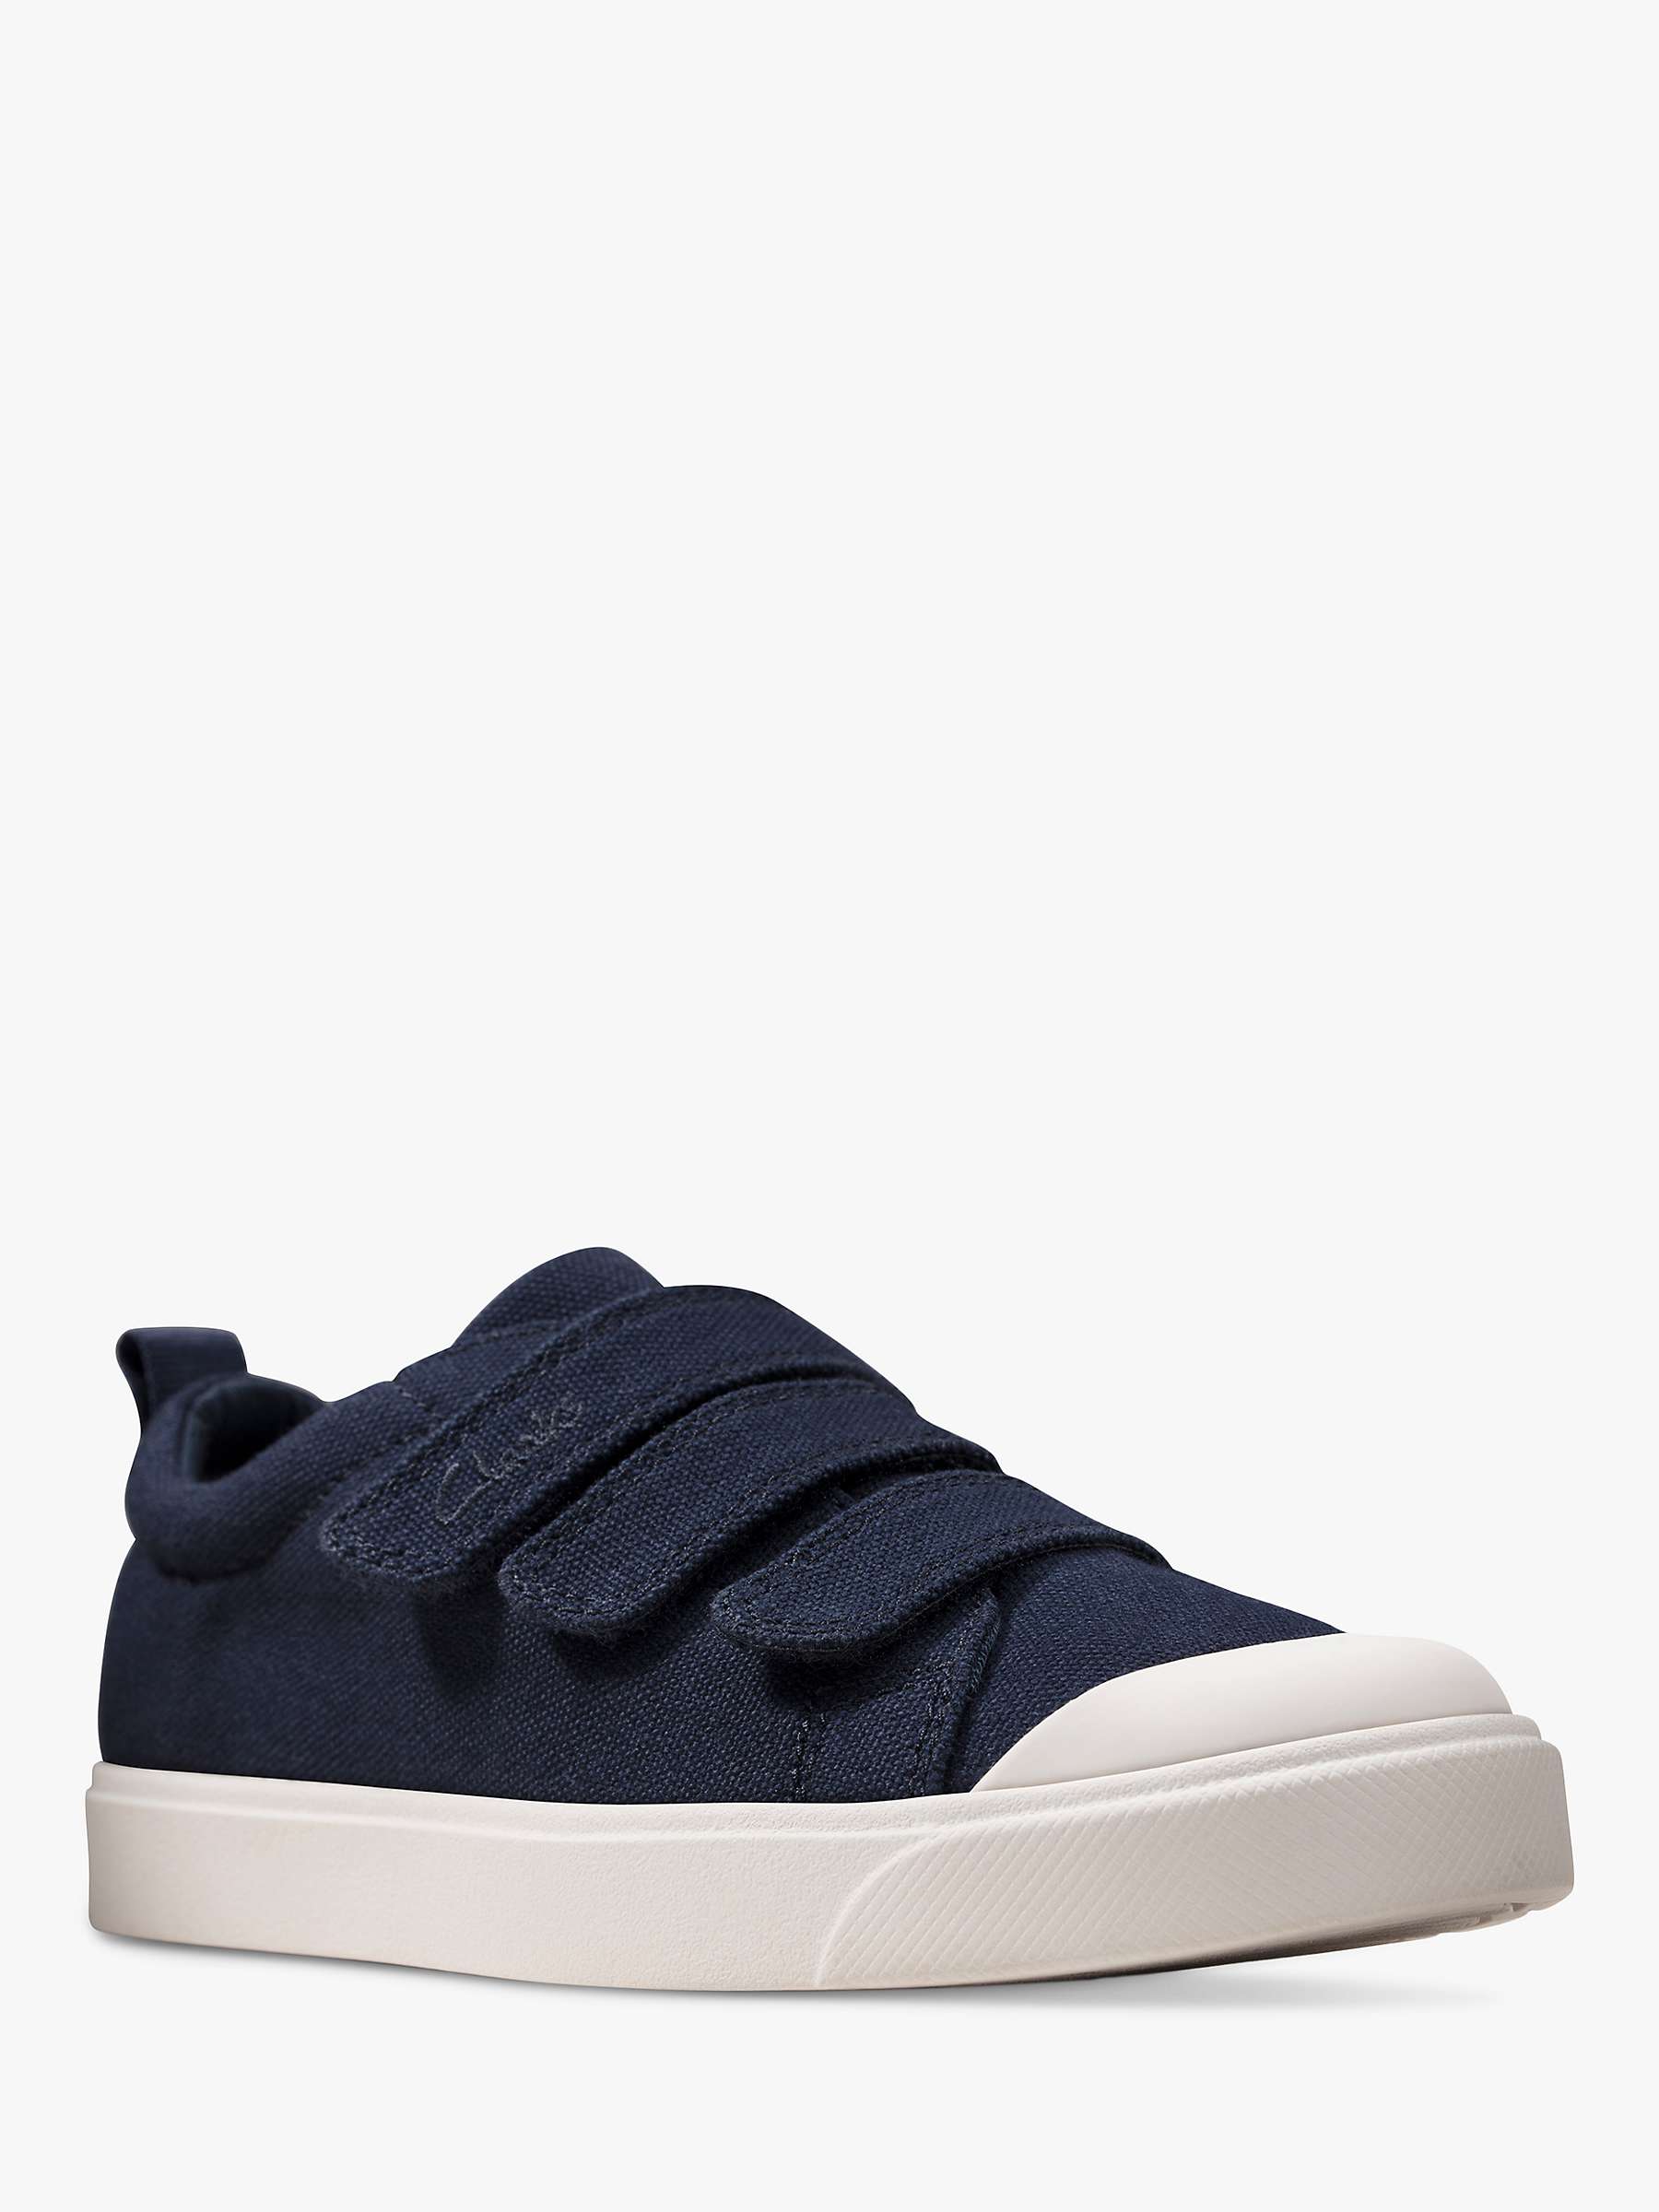 Buy Clarks City Vibe K Trainers Online at johnlewis.com